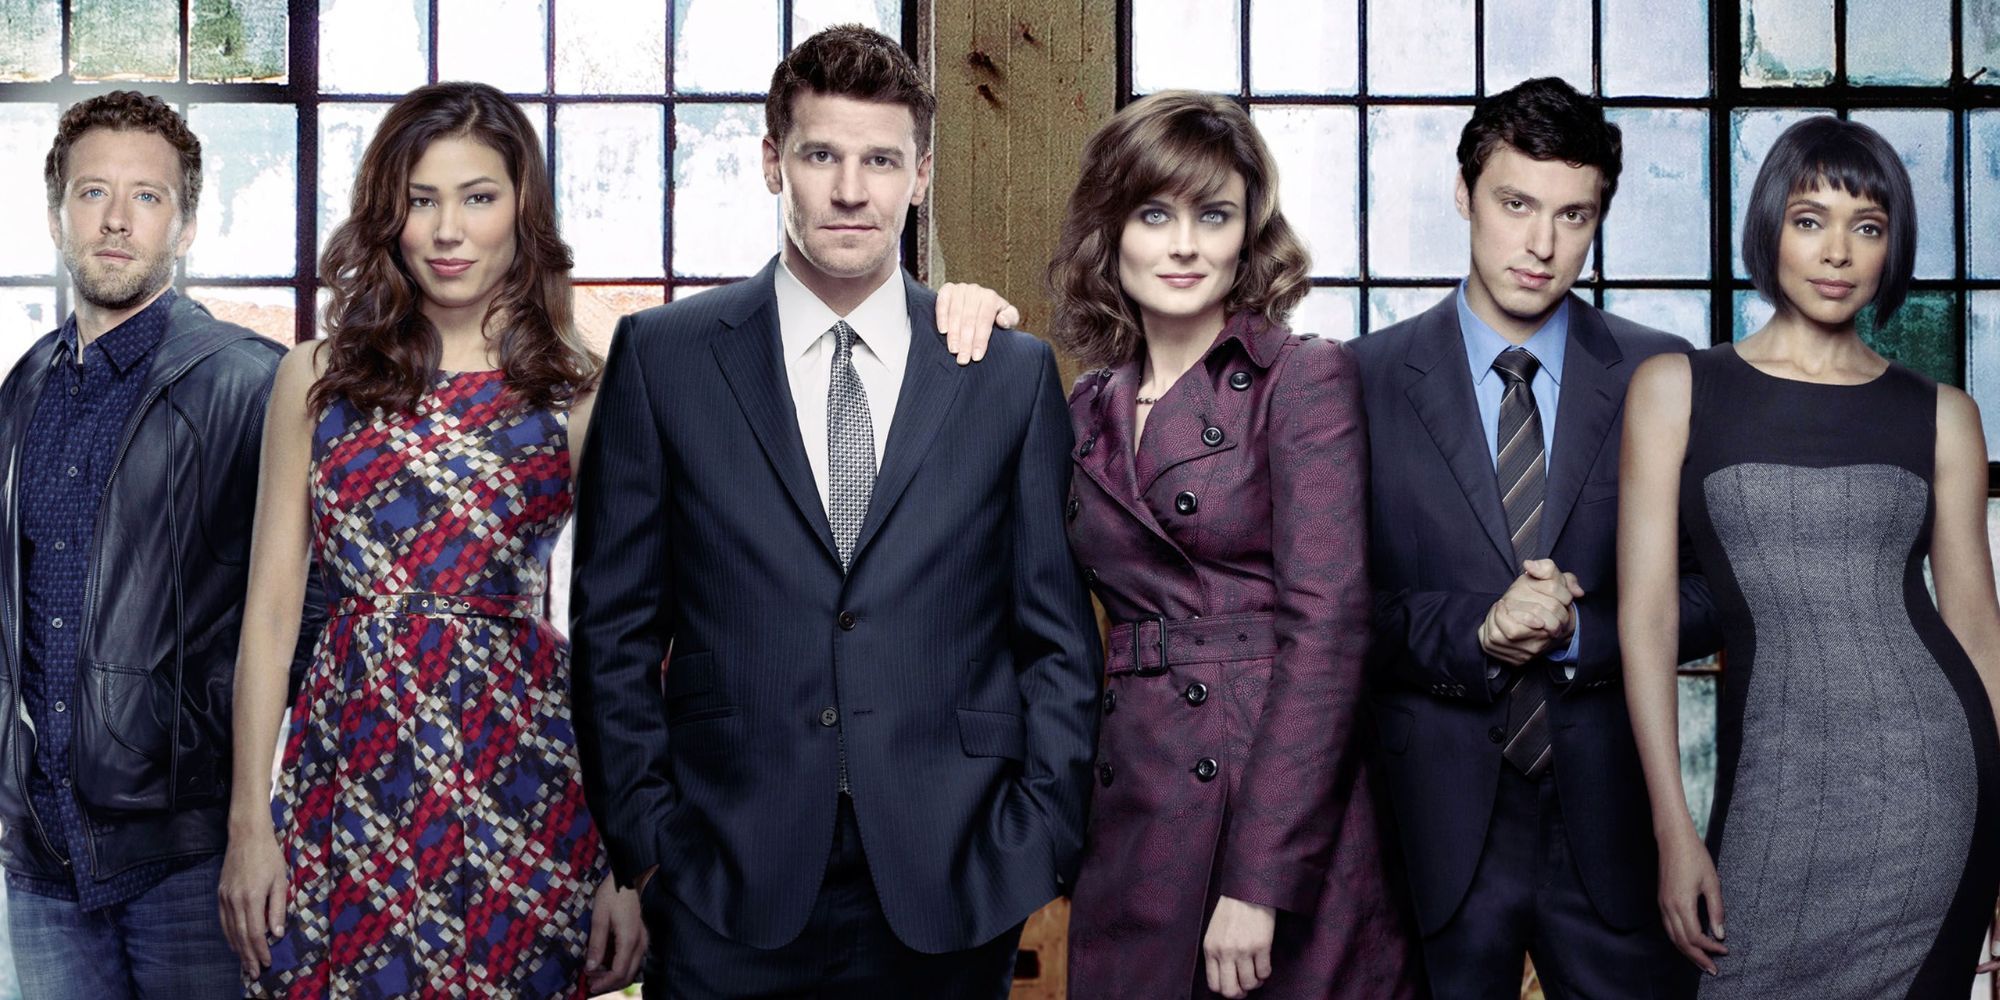 The main cast of 'Bones' standing together in a promotional photo